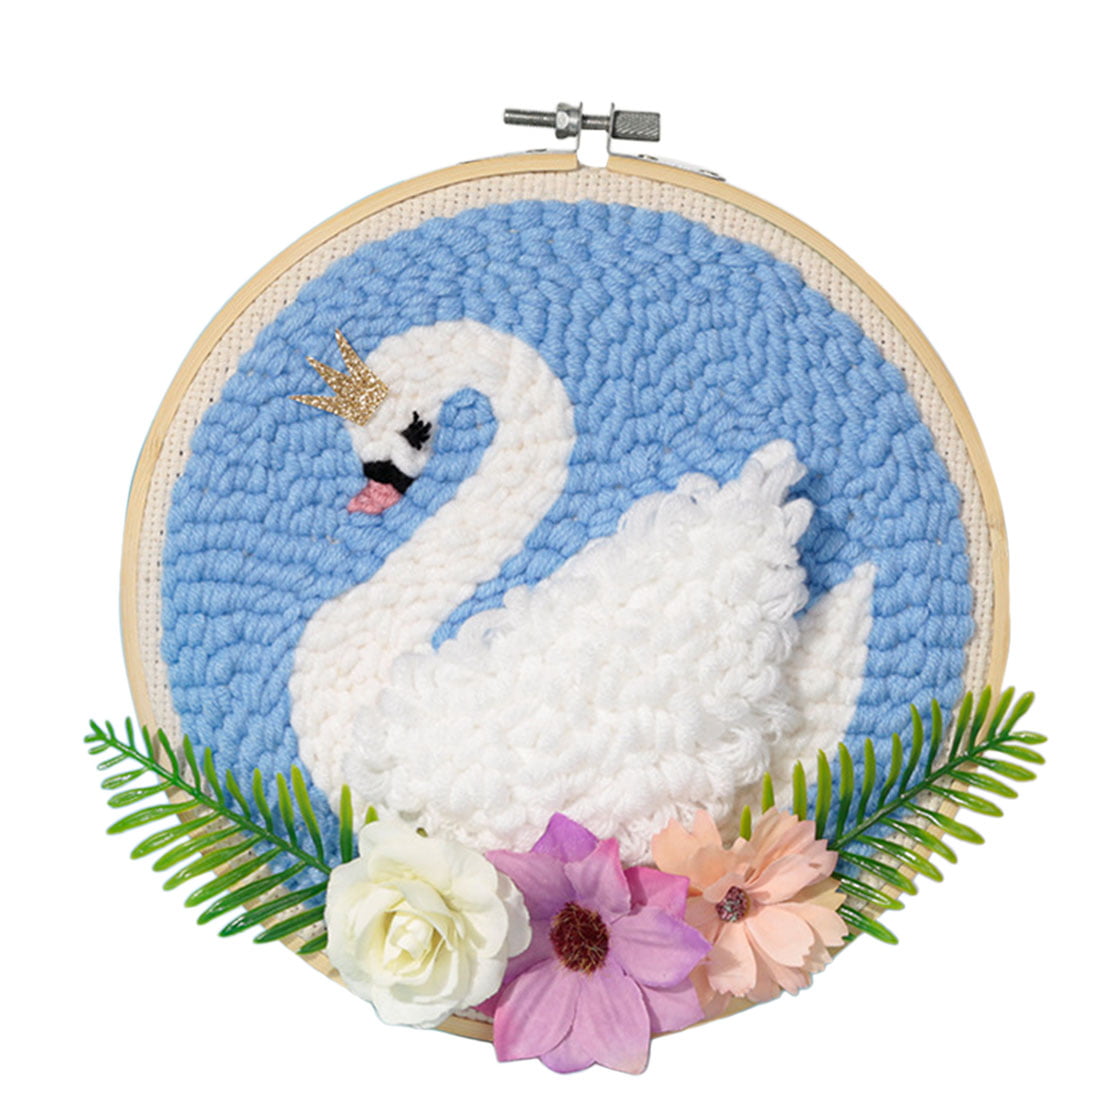 Afternoon Garden Handcraft Woolen Embroidery Creative Gift with 15 x 15cm Embroidery Frame Punch Needle Jenny6981Juli DIY Rug Hooking Making Kits for Kids Adults Beginner